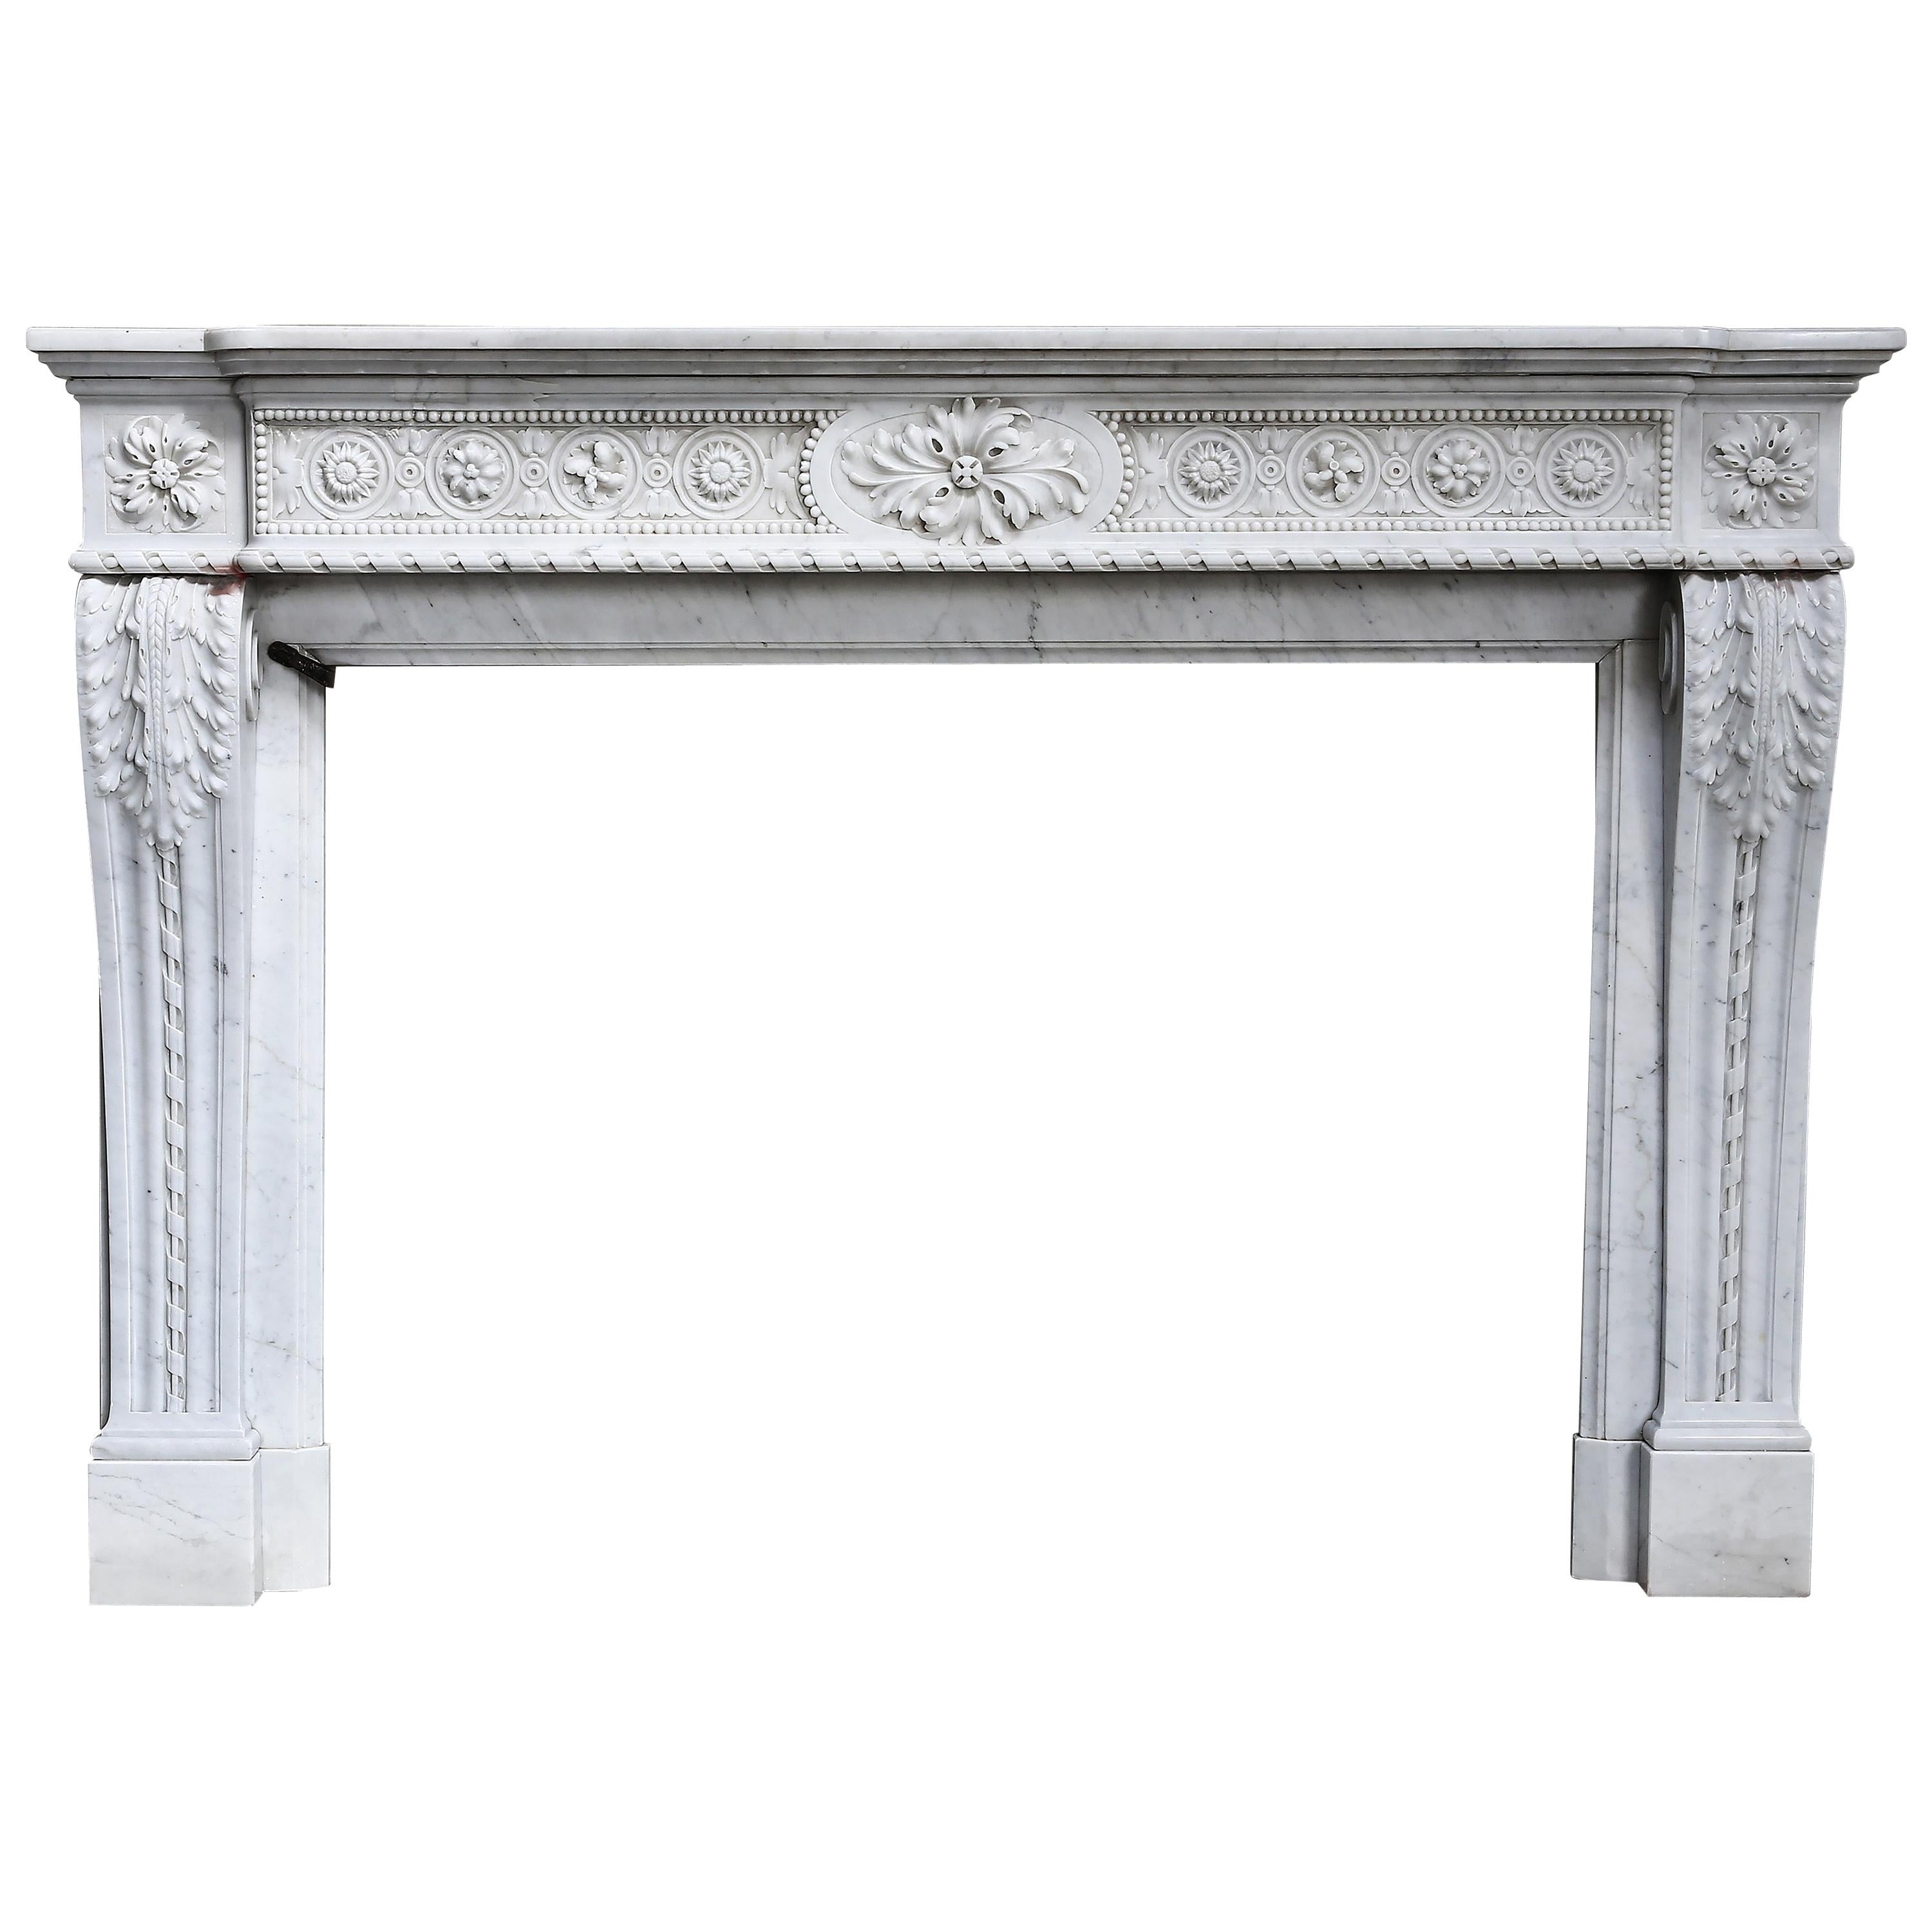 Antique Unique Fireplace of Carrara Marble from the 18th Century